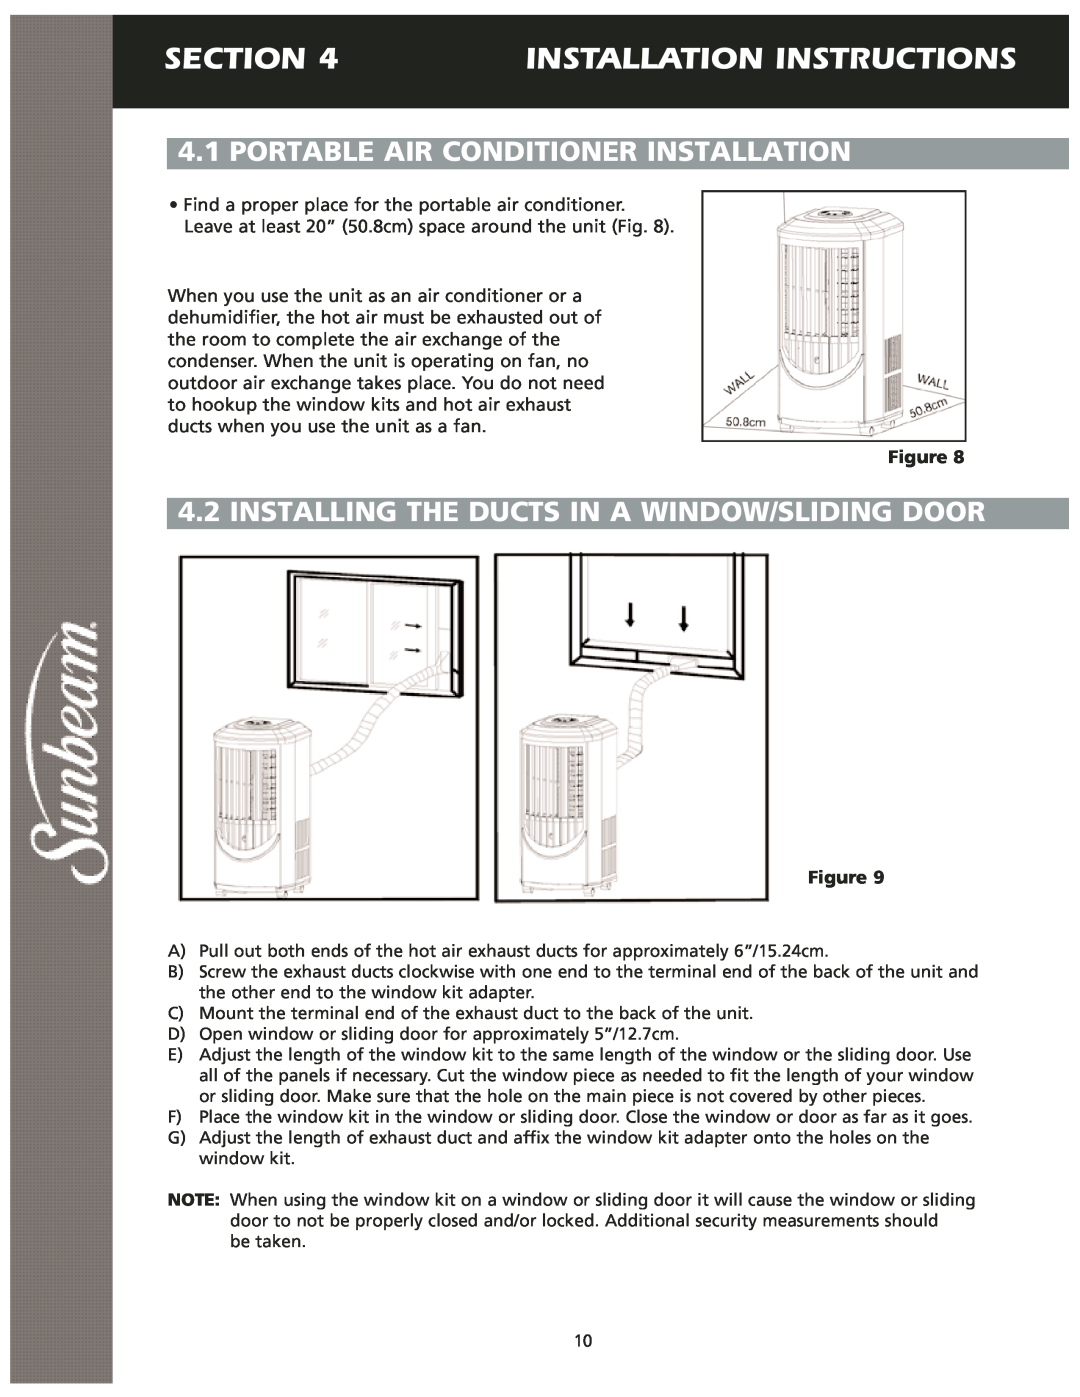 Sunbeam KY-25 user manual Installation Instructions, 4.1PORTABLE AIR CONDITIONER INSTALLATION, Section 